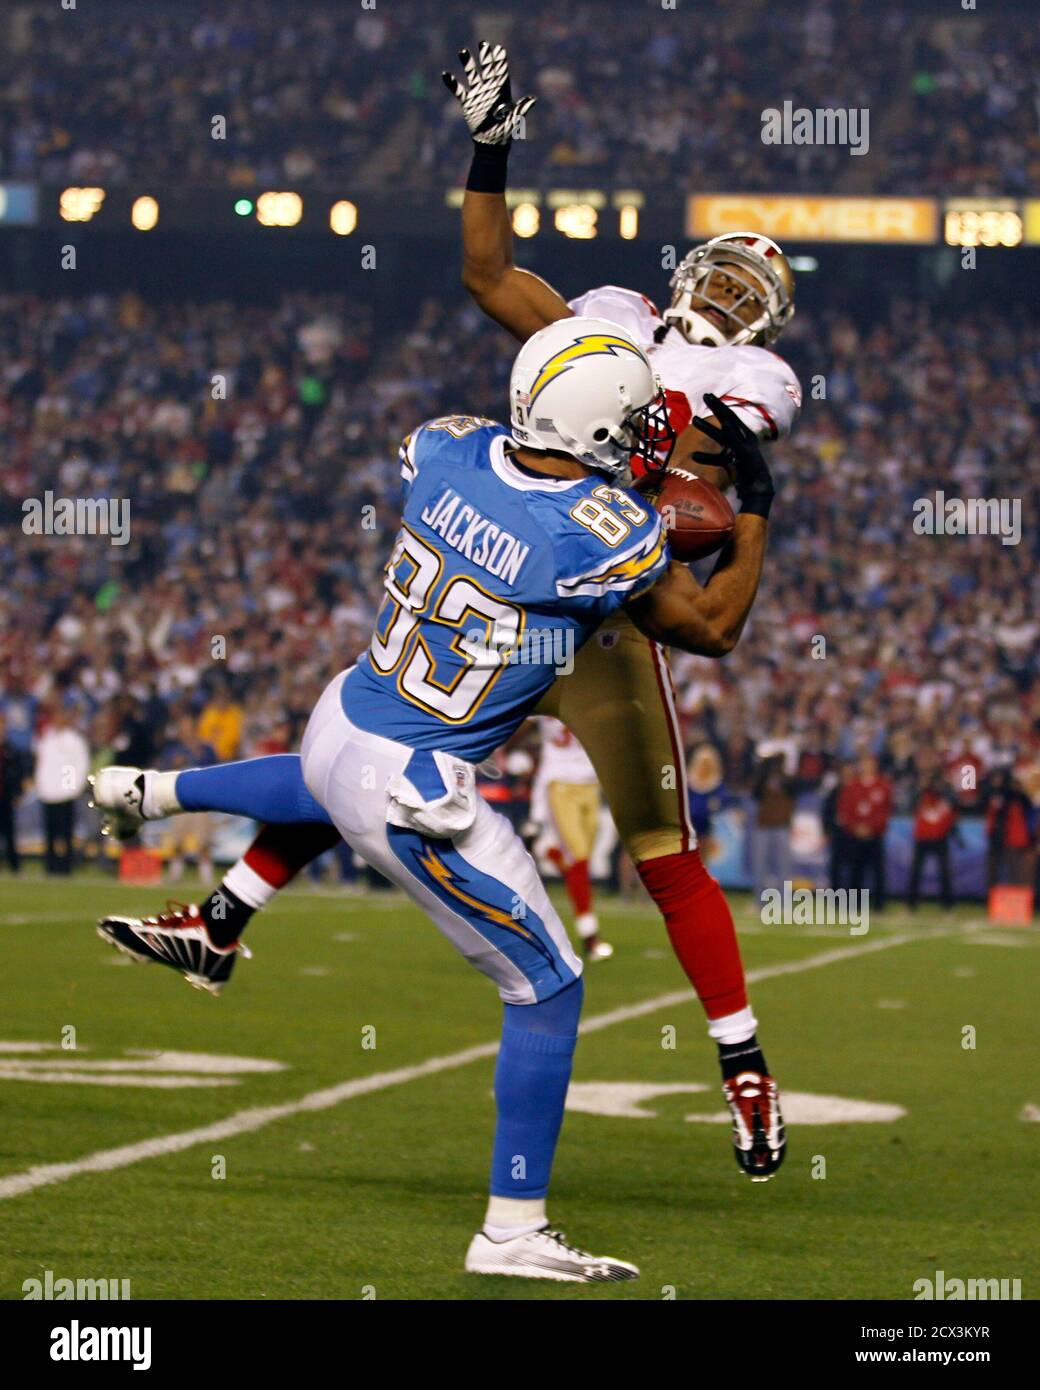 San Diego Chargers wide receiver Vincent Jackson (front) catches a pass that led to a touchdown as San Francisco 49ers cornerback Nate Clements tries to stop him during their NFL football game in San Diego, California December 16, 2010.    REUTERS/Mike Blake   (UNITED STATES - Tags: SPORT FOOTBALL IMAGES OF THE DAY) Stock Photo